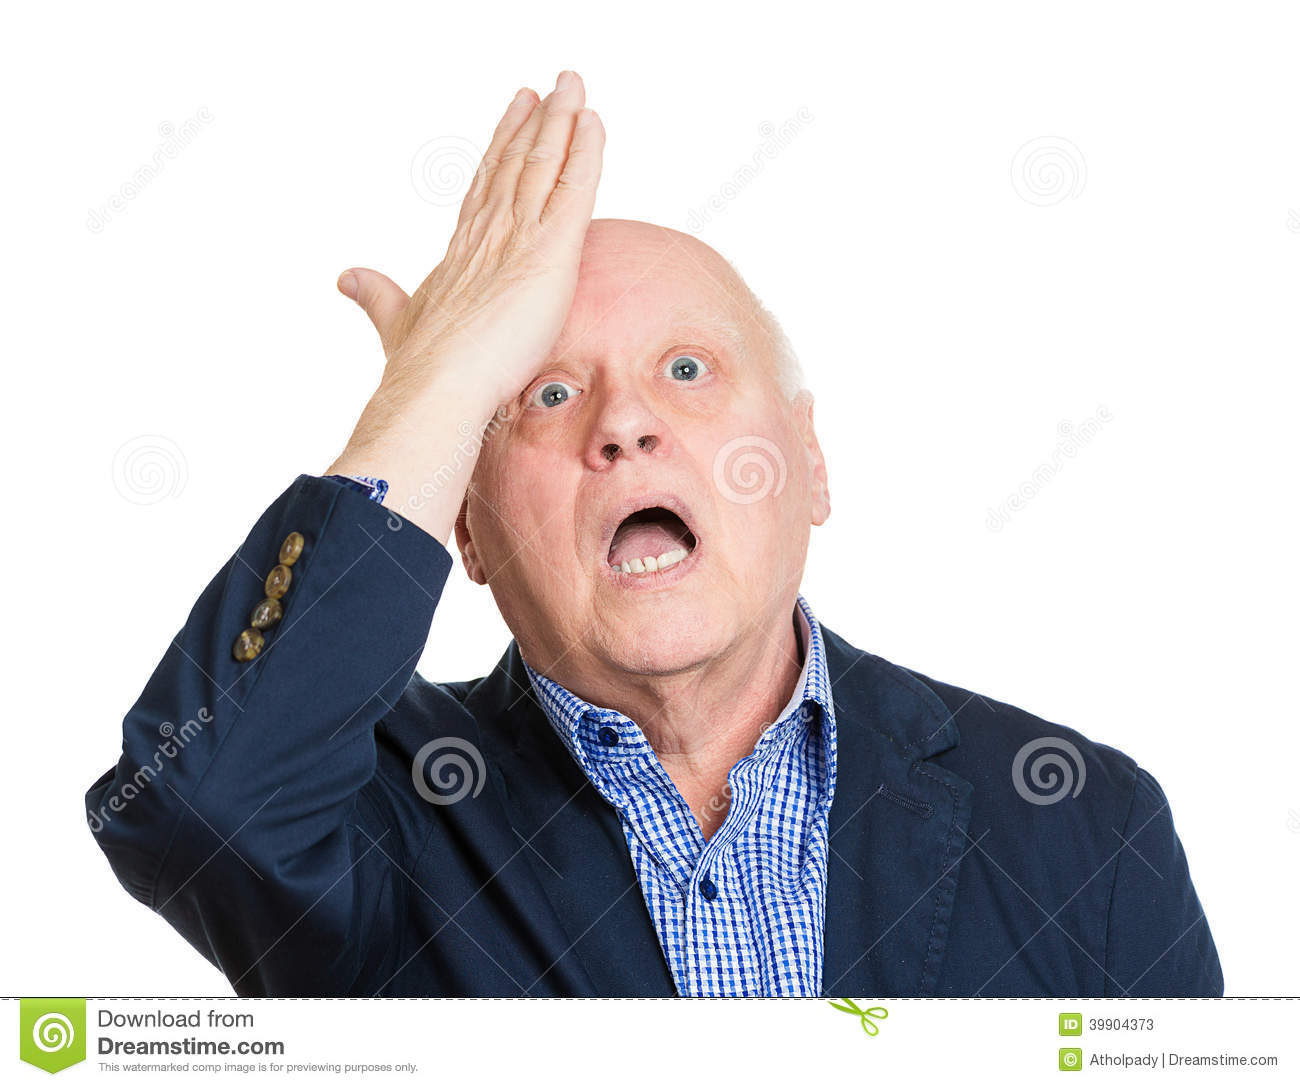 oops-duh-closeup-portrait-goofy-funny-face-senior-mature-man-slapping-hand-head-to-say-isolated-white-background-negative-human-39904373.jpg